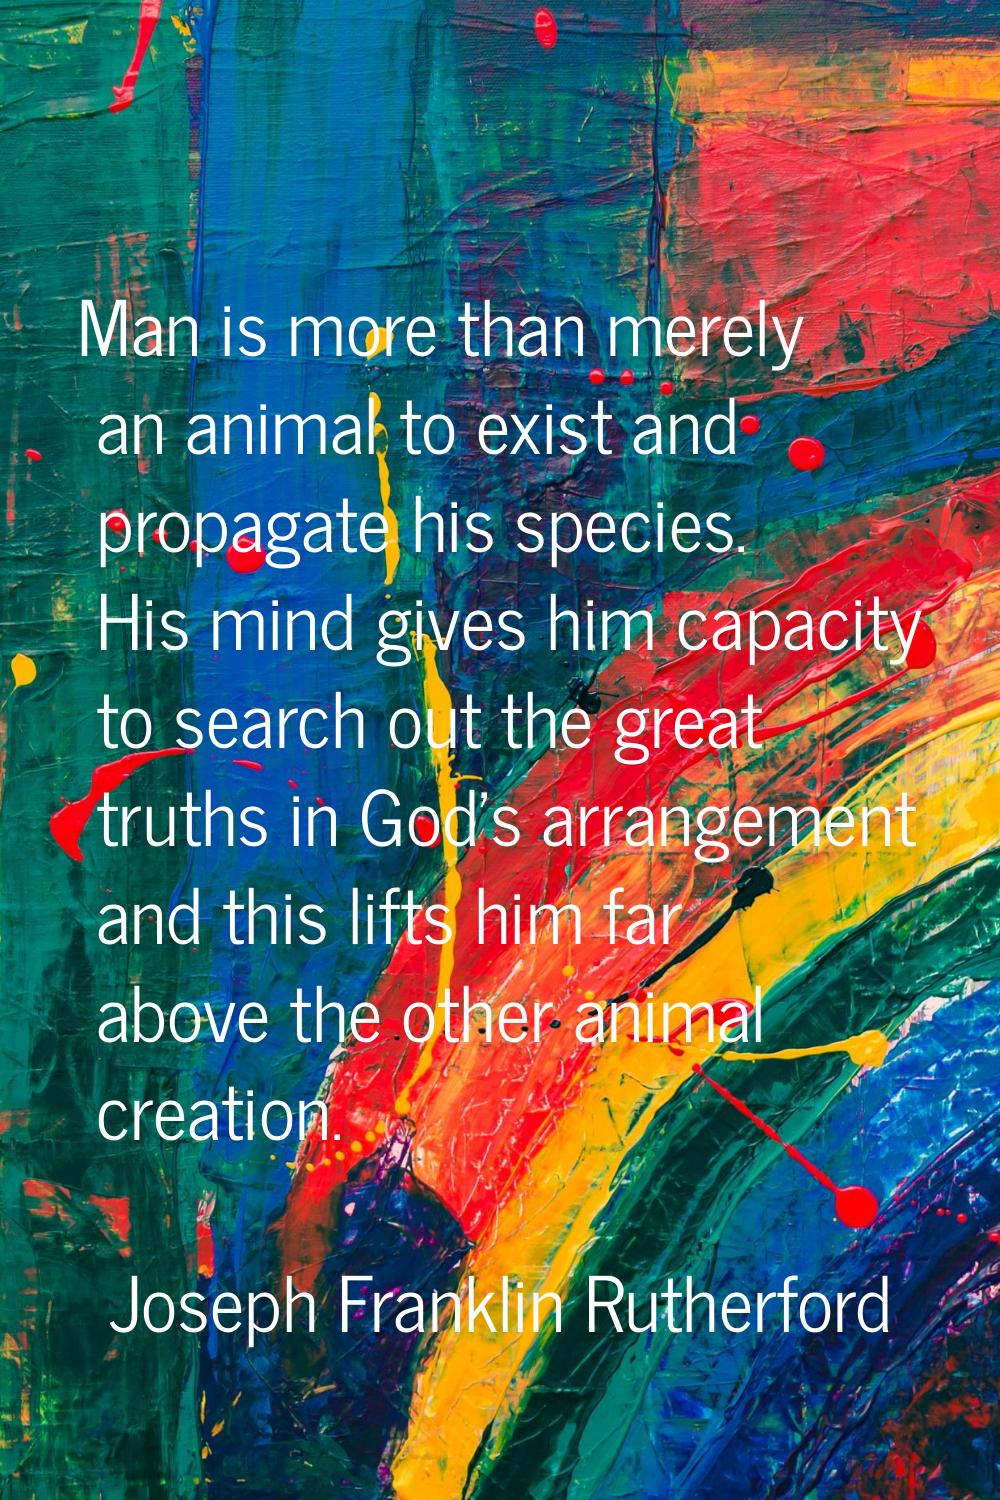 Man is more than merely an animal to exist and propagate his species. His mind gives him capacity t